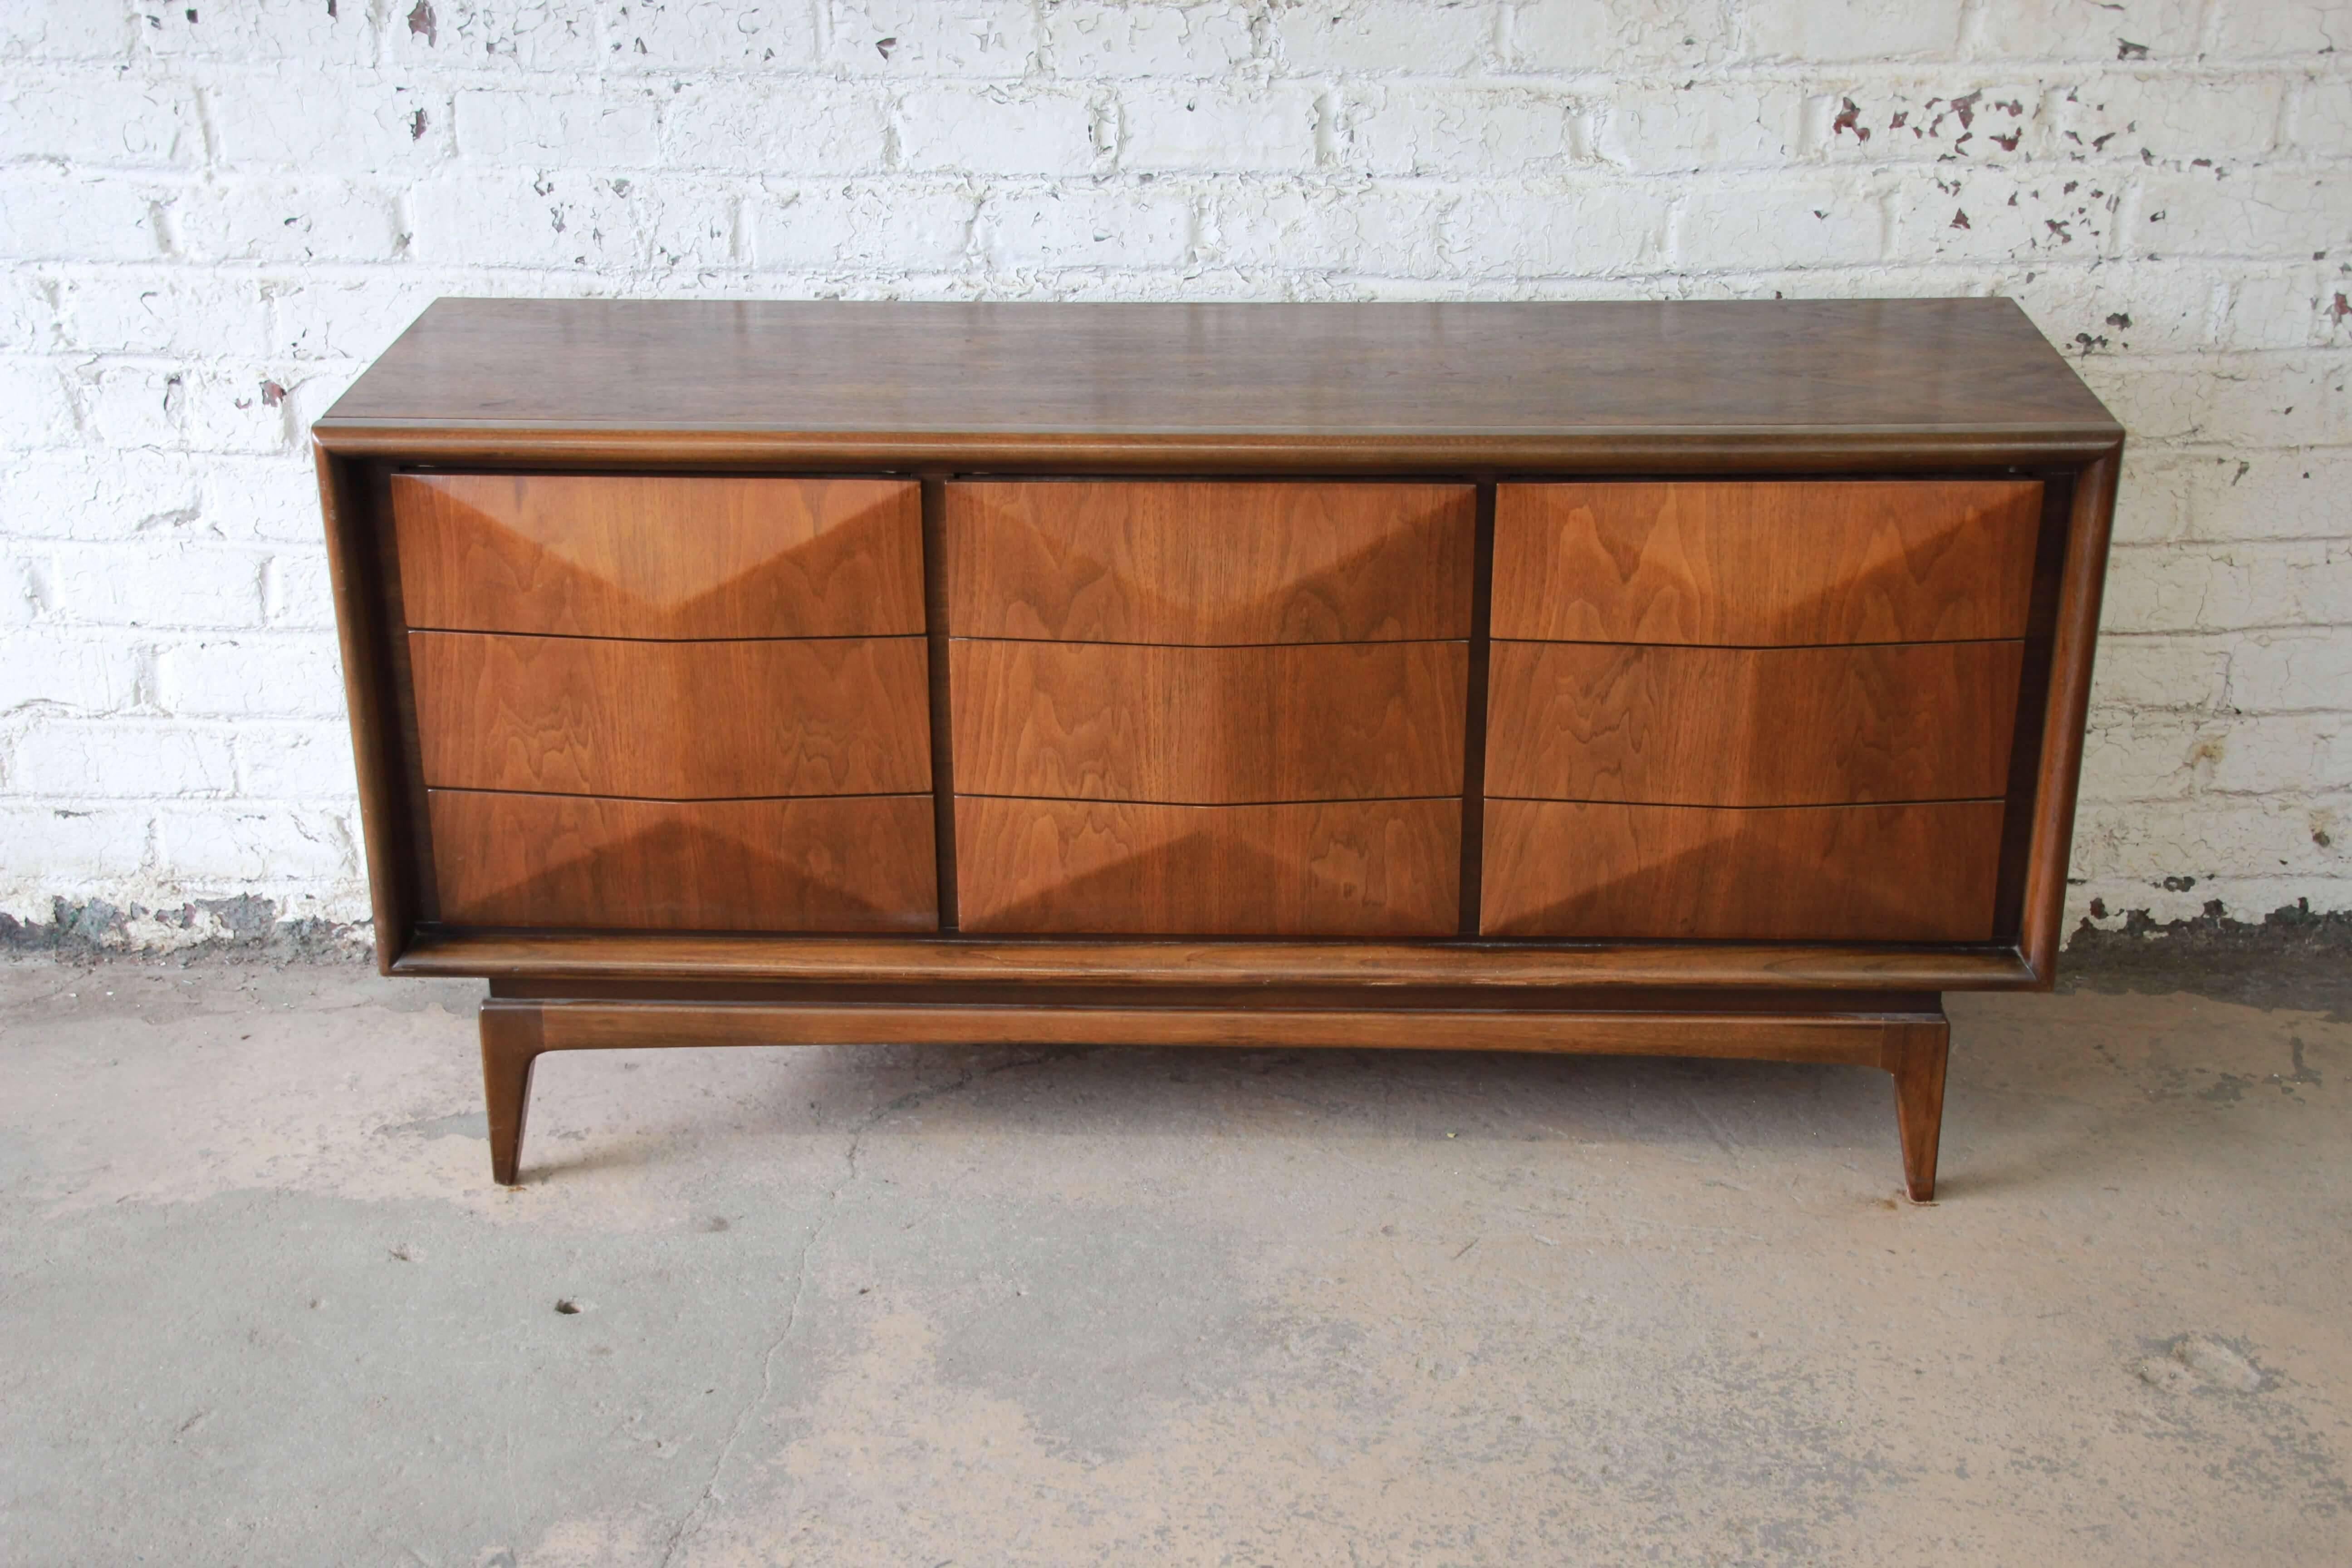 An exceptional and unique Mid-Century Modern diamond front dresser or credenza by United Furniture. The dresser features stunning walnut wood grain and a sculpted diamond front with nine hefty drawers. It is well constructed, with stylish angled